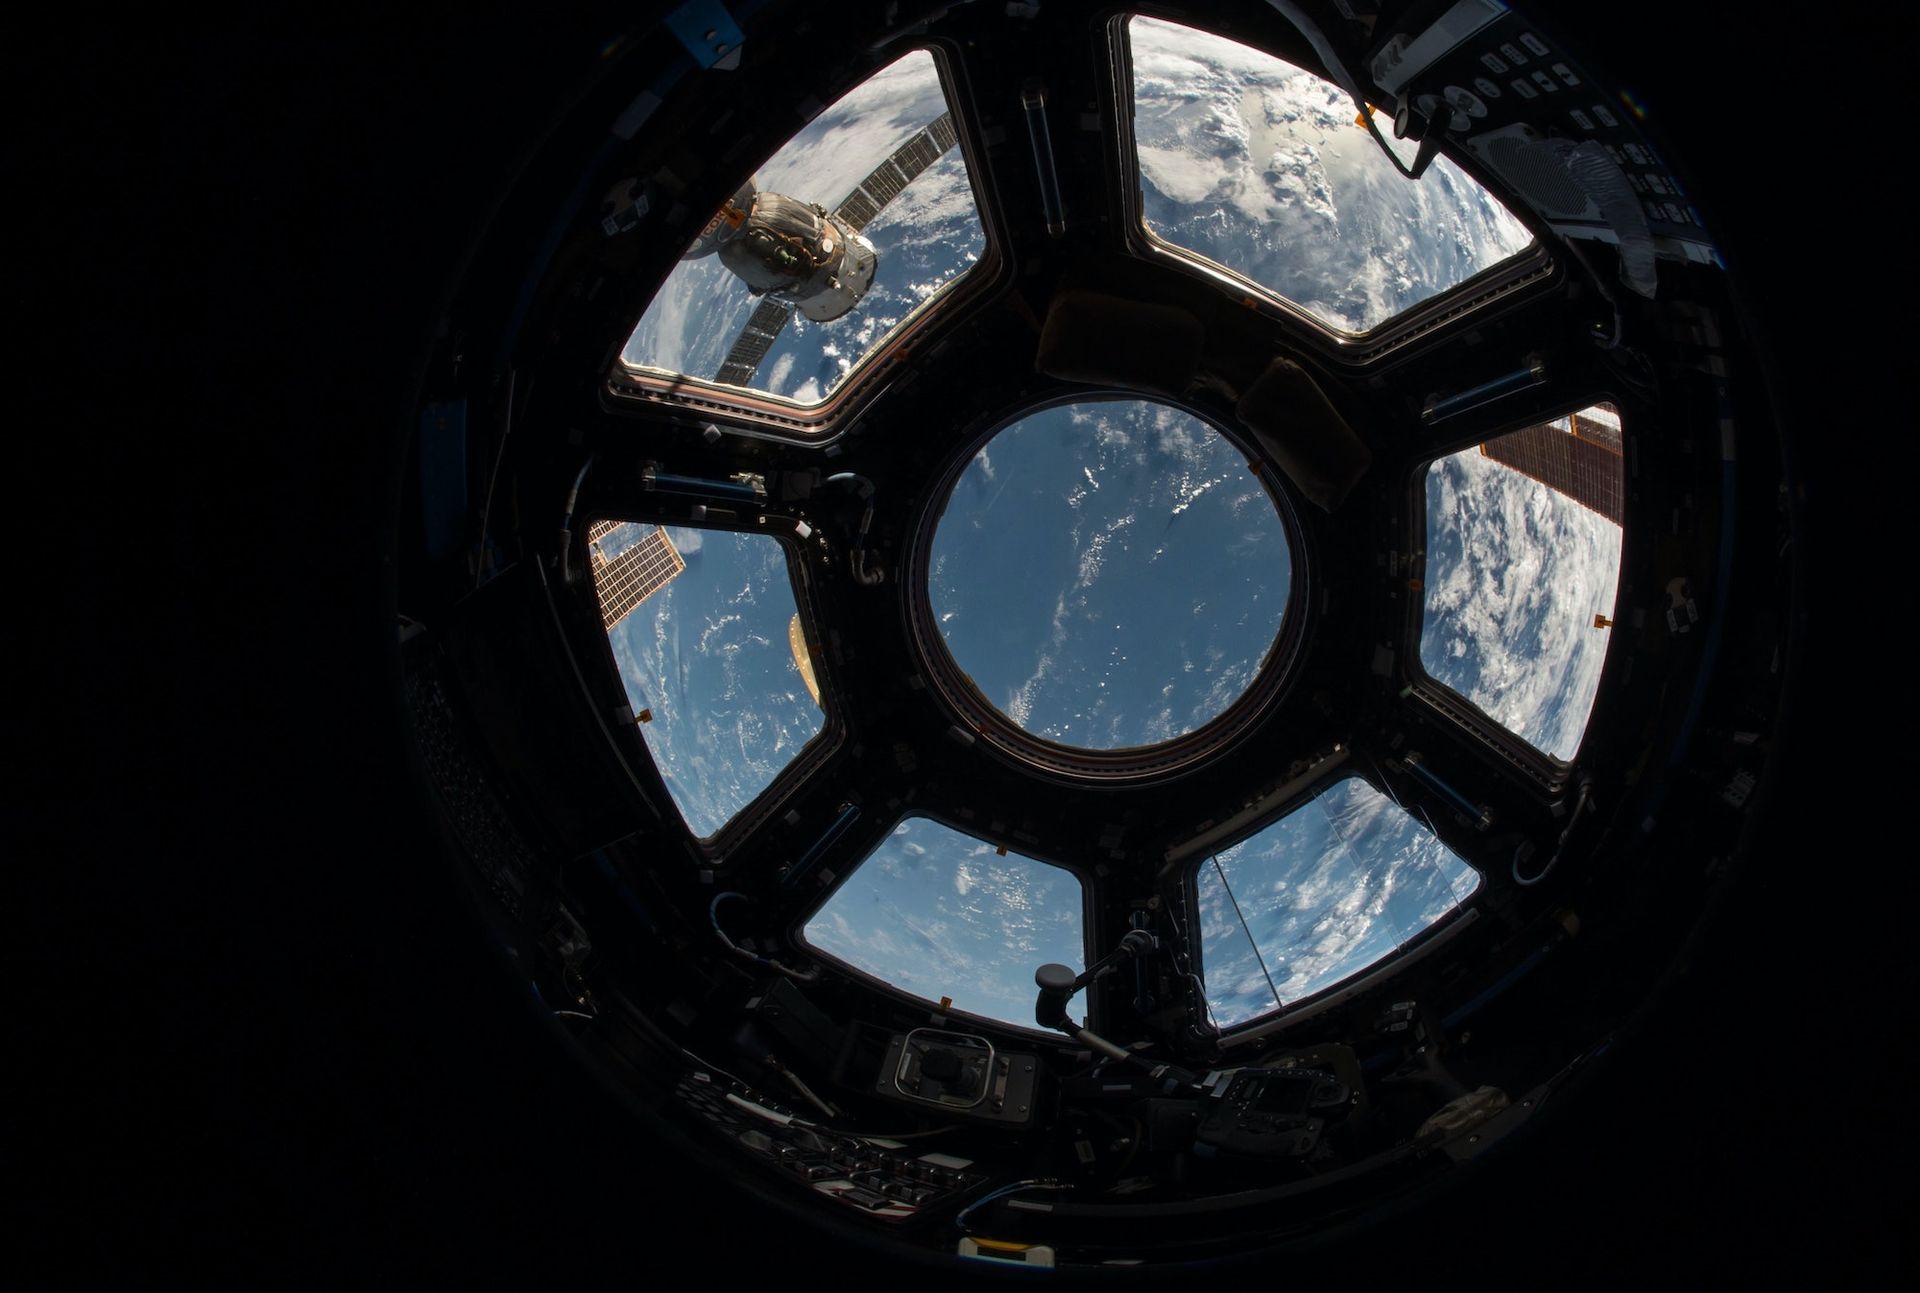 A view of earth, looking out of a spacestation window